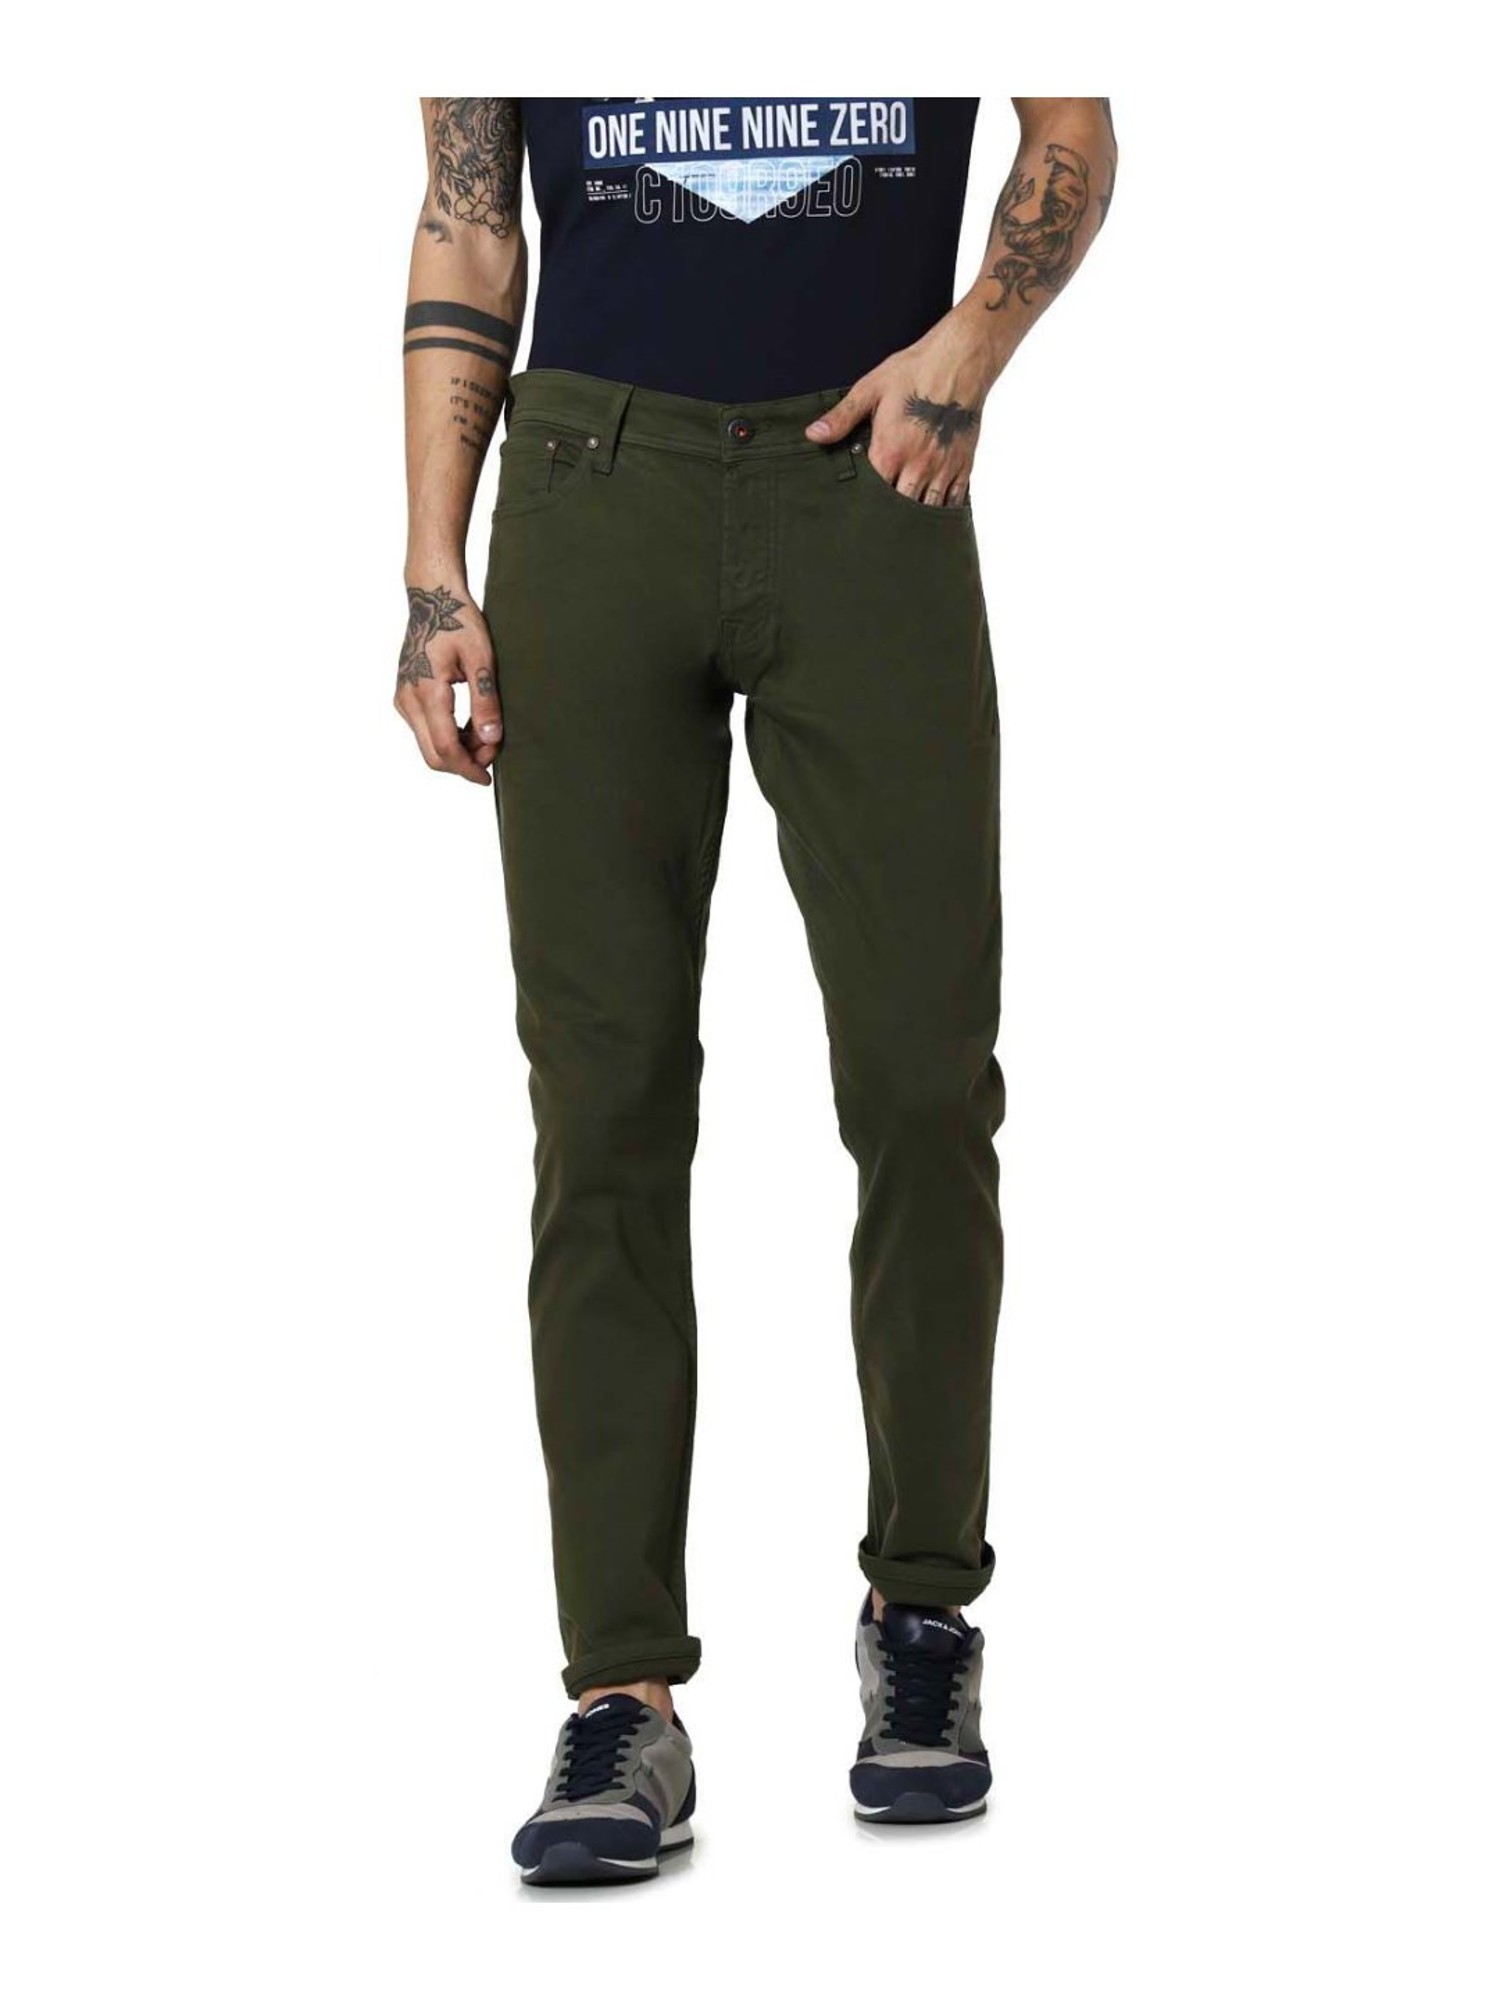 Trousers & Shorts | Cotton Traders Mens Coloured Stretch Jeans Chocolate |  AKMV Shahabad